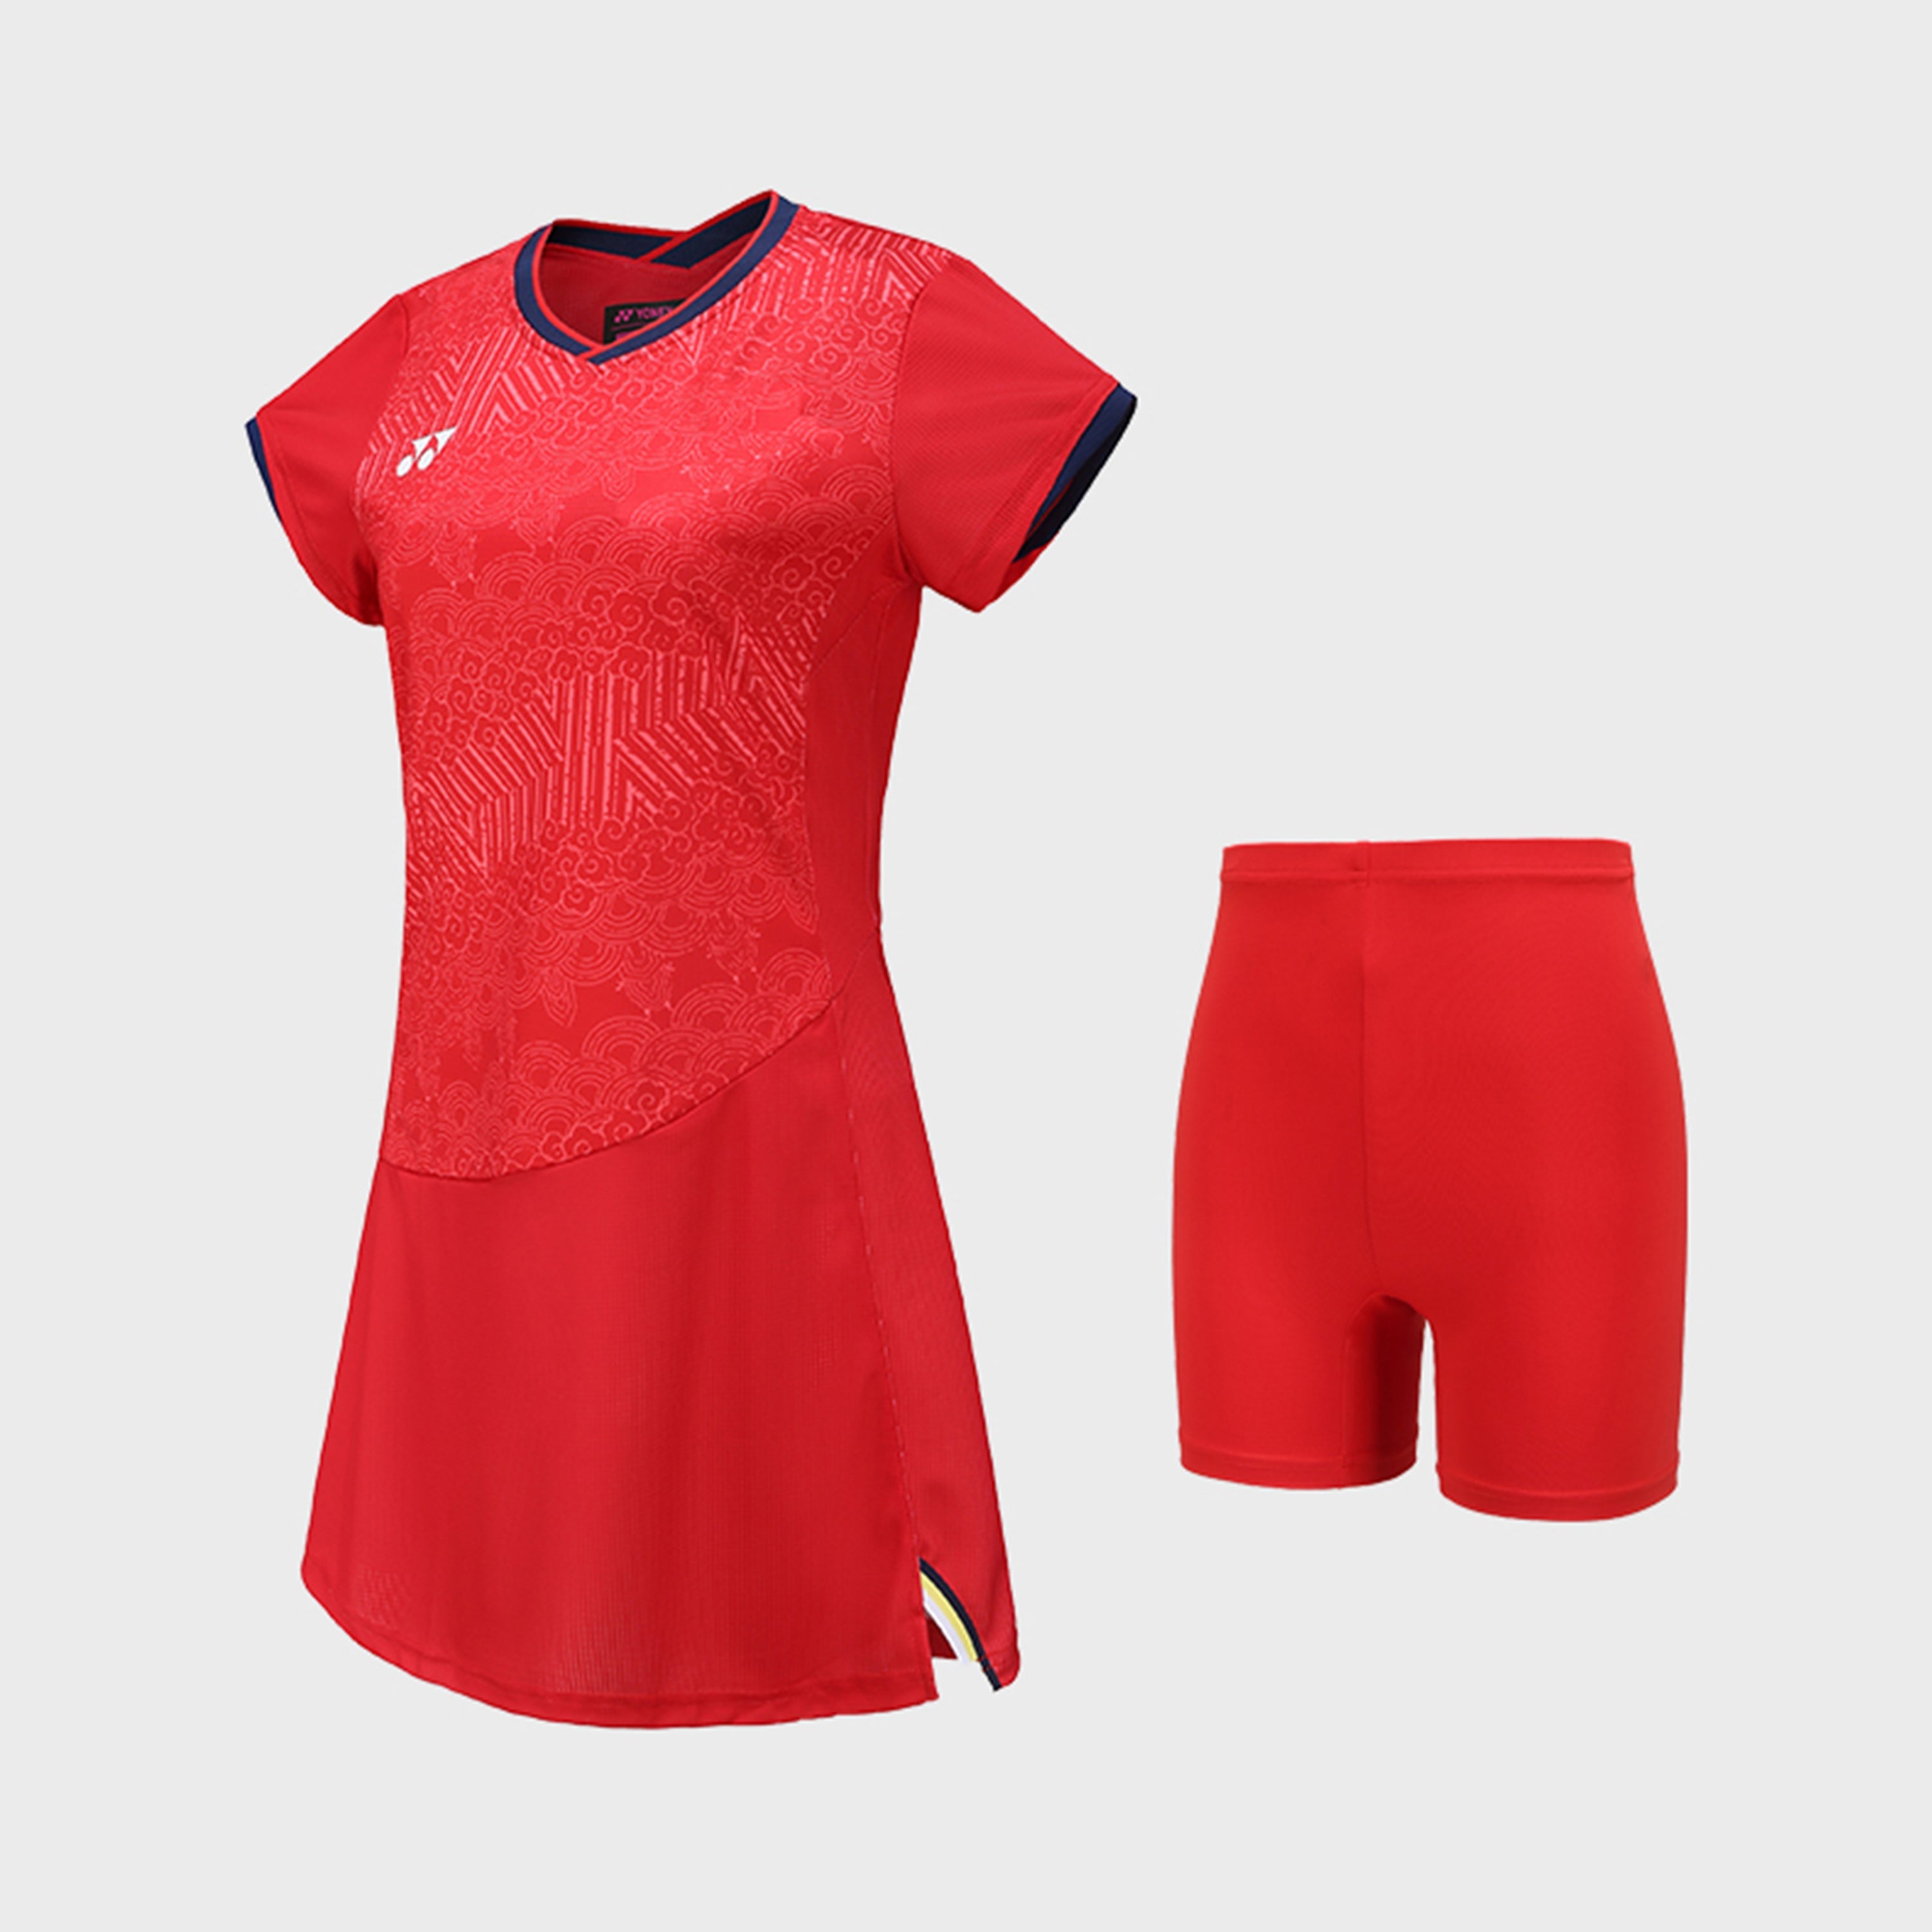 Yonex Womens Premium Sports Dress (with inner shorts) 20683 RubyRed (Clearance)